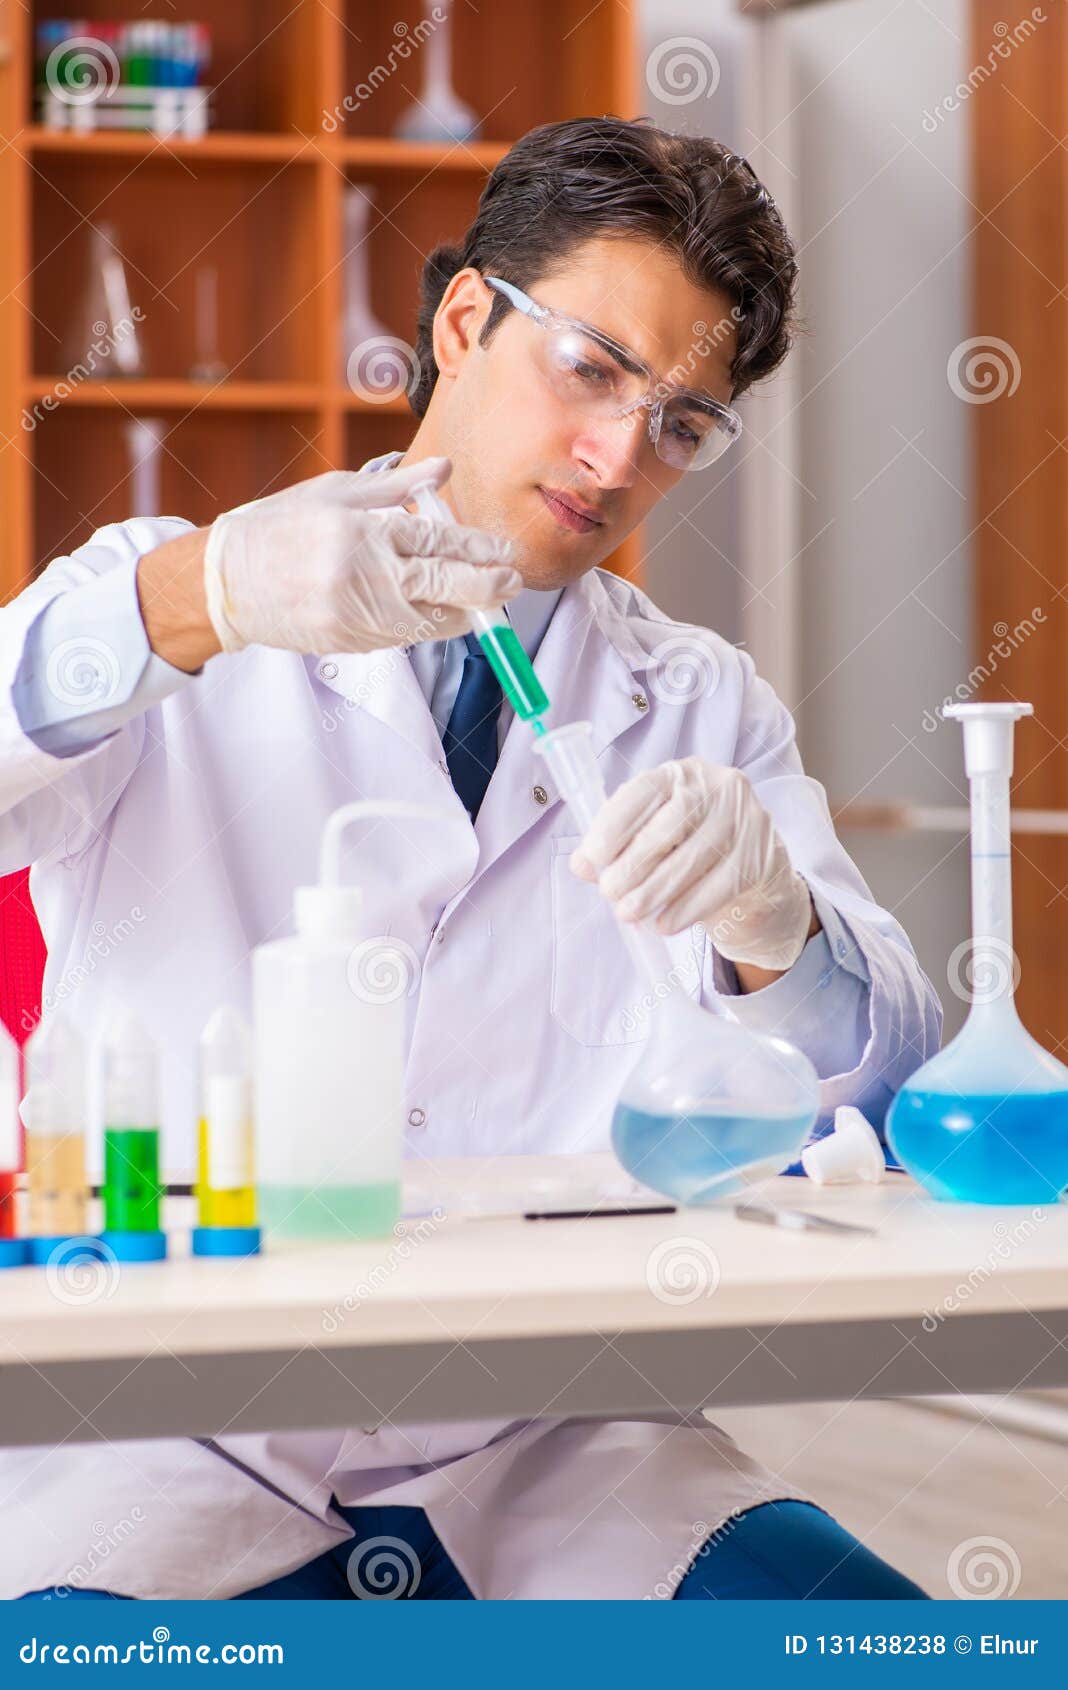 the young handsome biochemist working in the lab